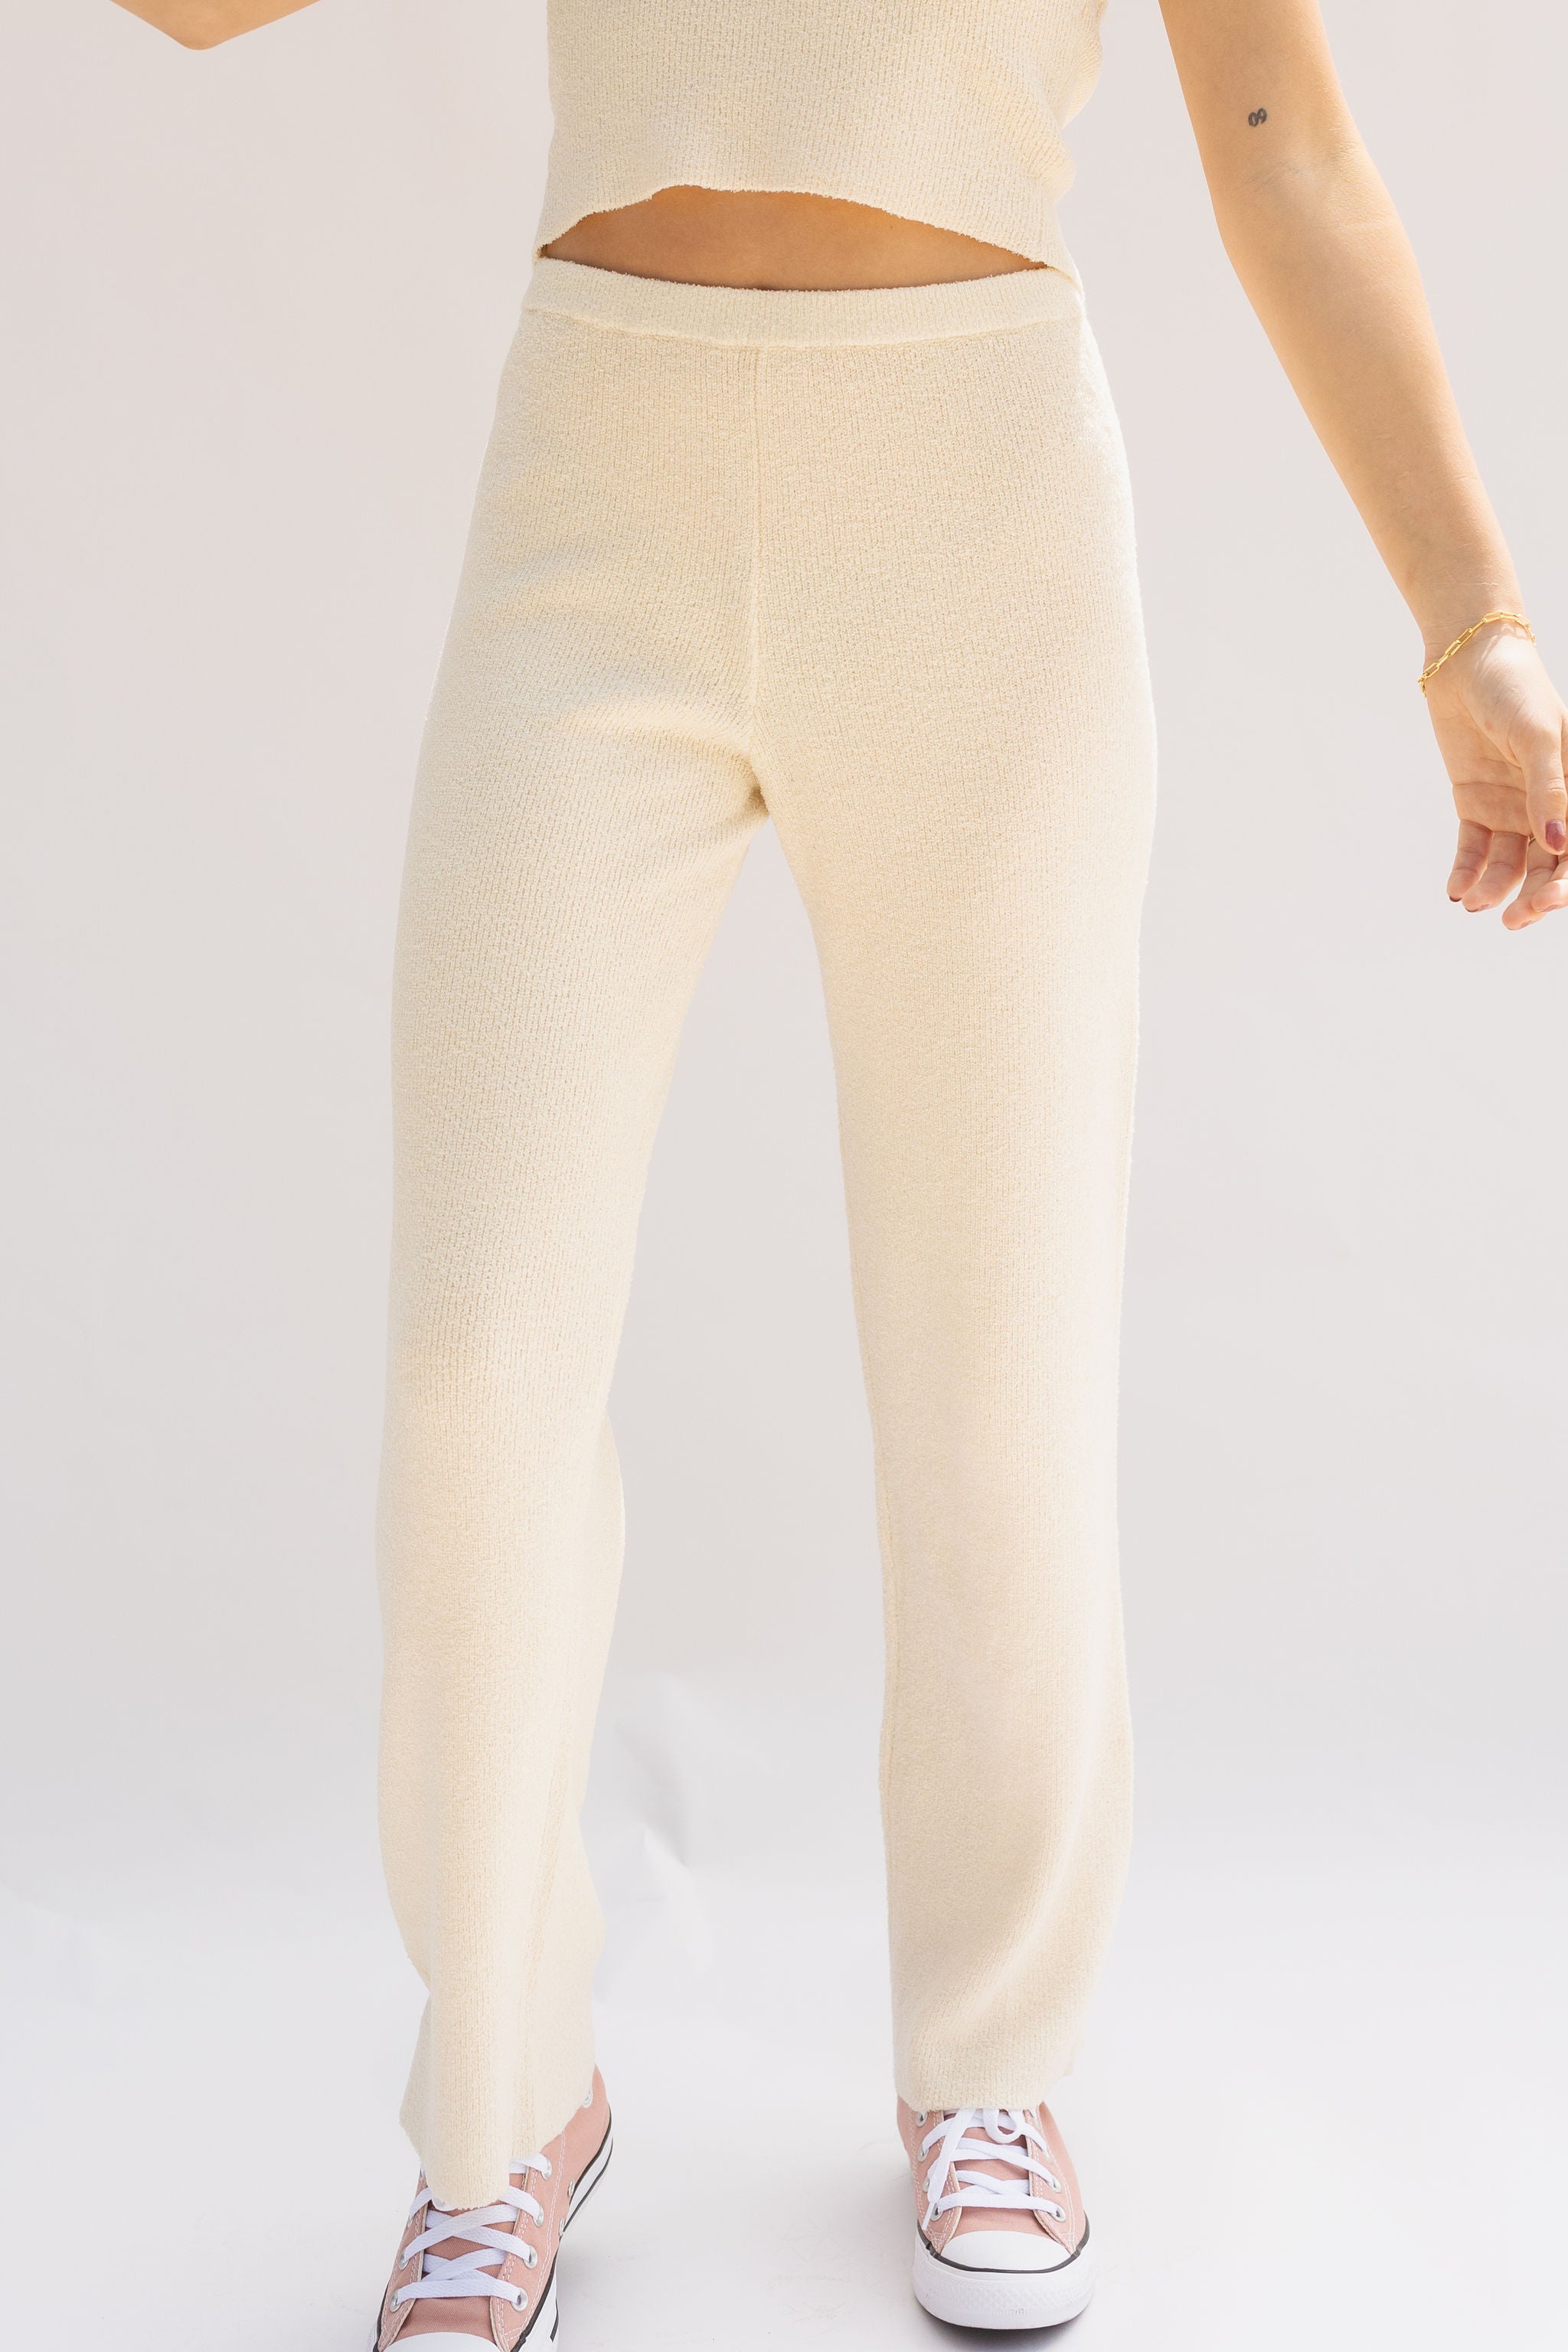 Start Looking High Rise Knit Pants by For Good